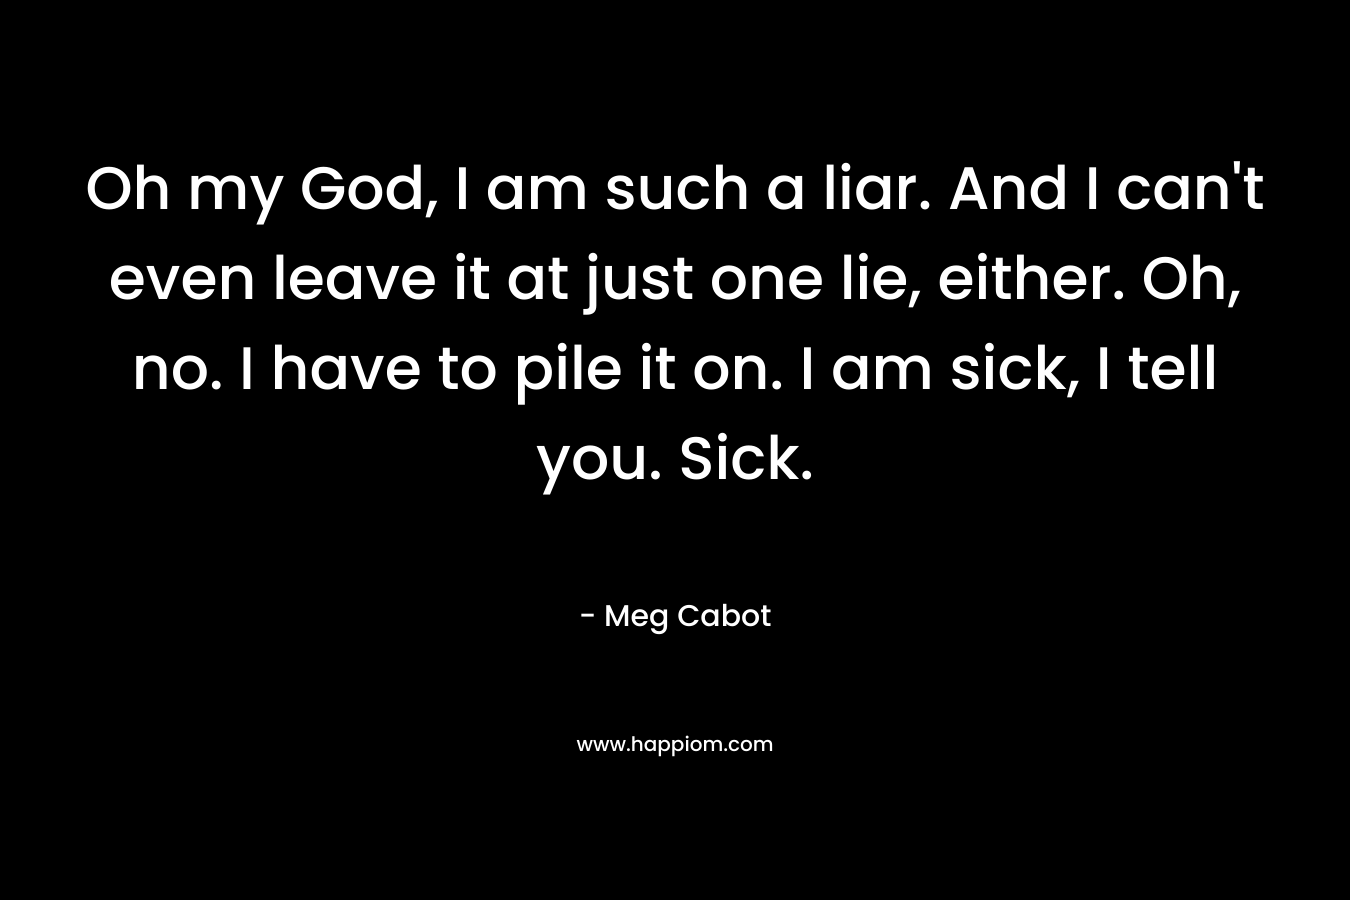 Oh my God, I am such a liar. And I can’t even leave it at just one lie, either. Oh, no. I have to pile it on. I am sick, I tell you. Sick. – Meg Cabot